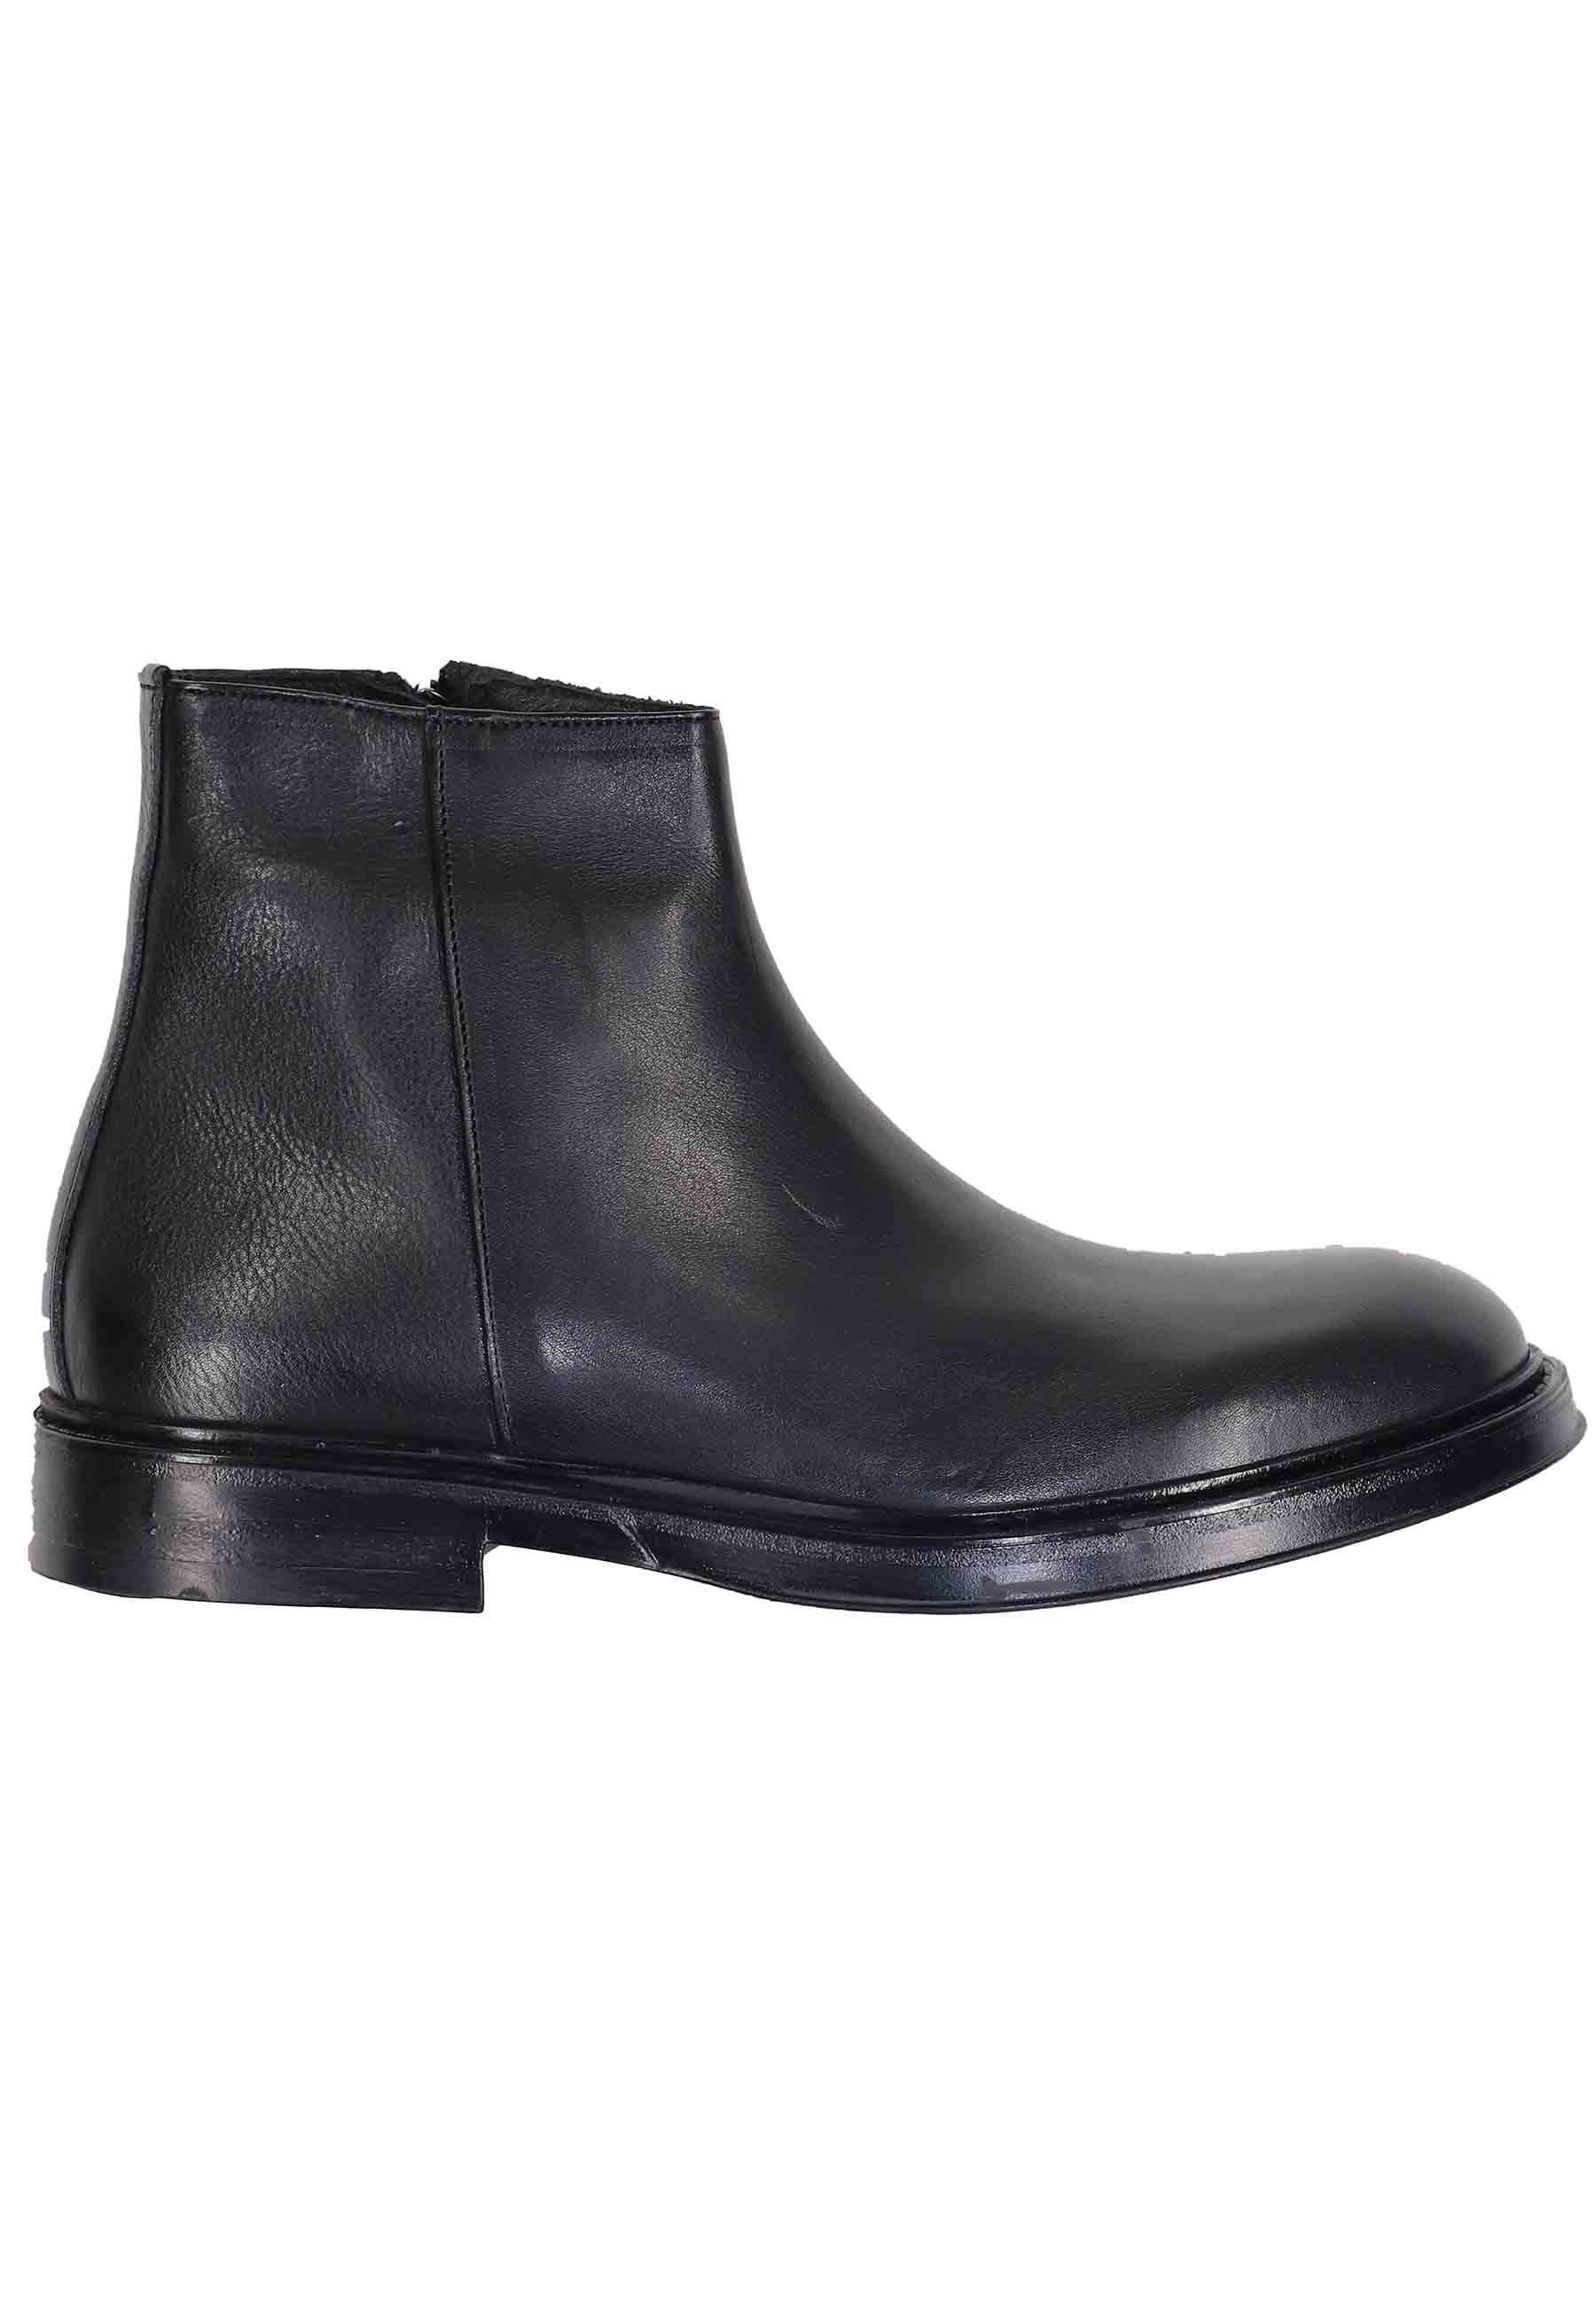 Men's black leather ankle boots with side zip and rubber sole